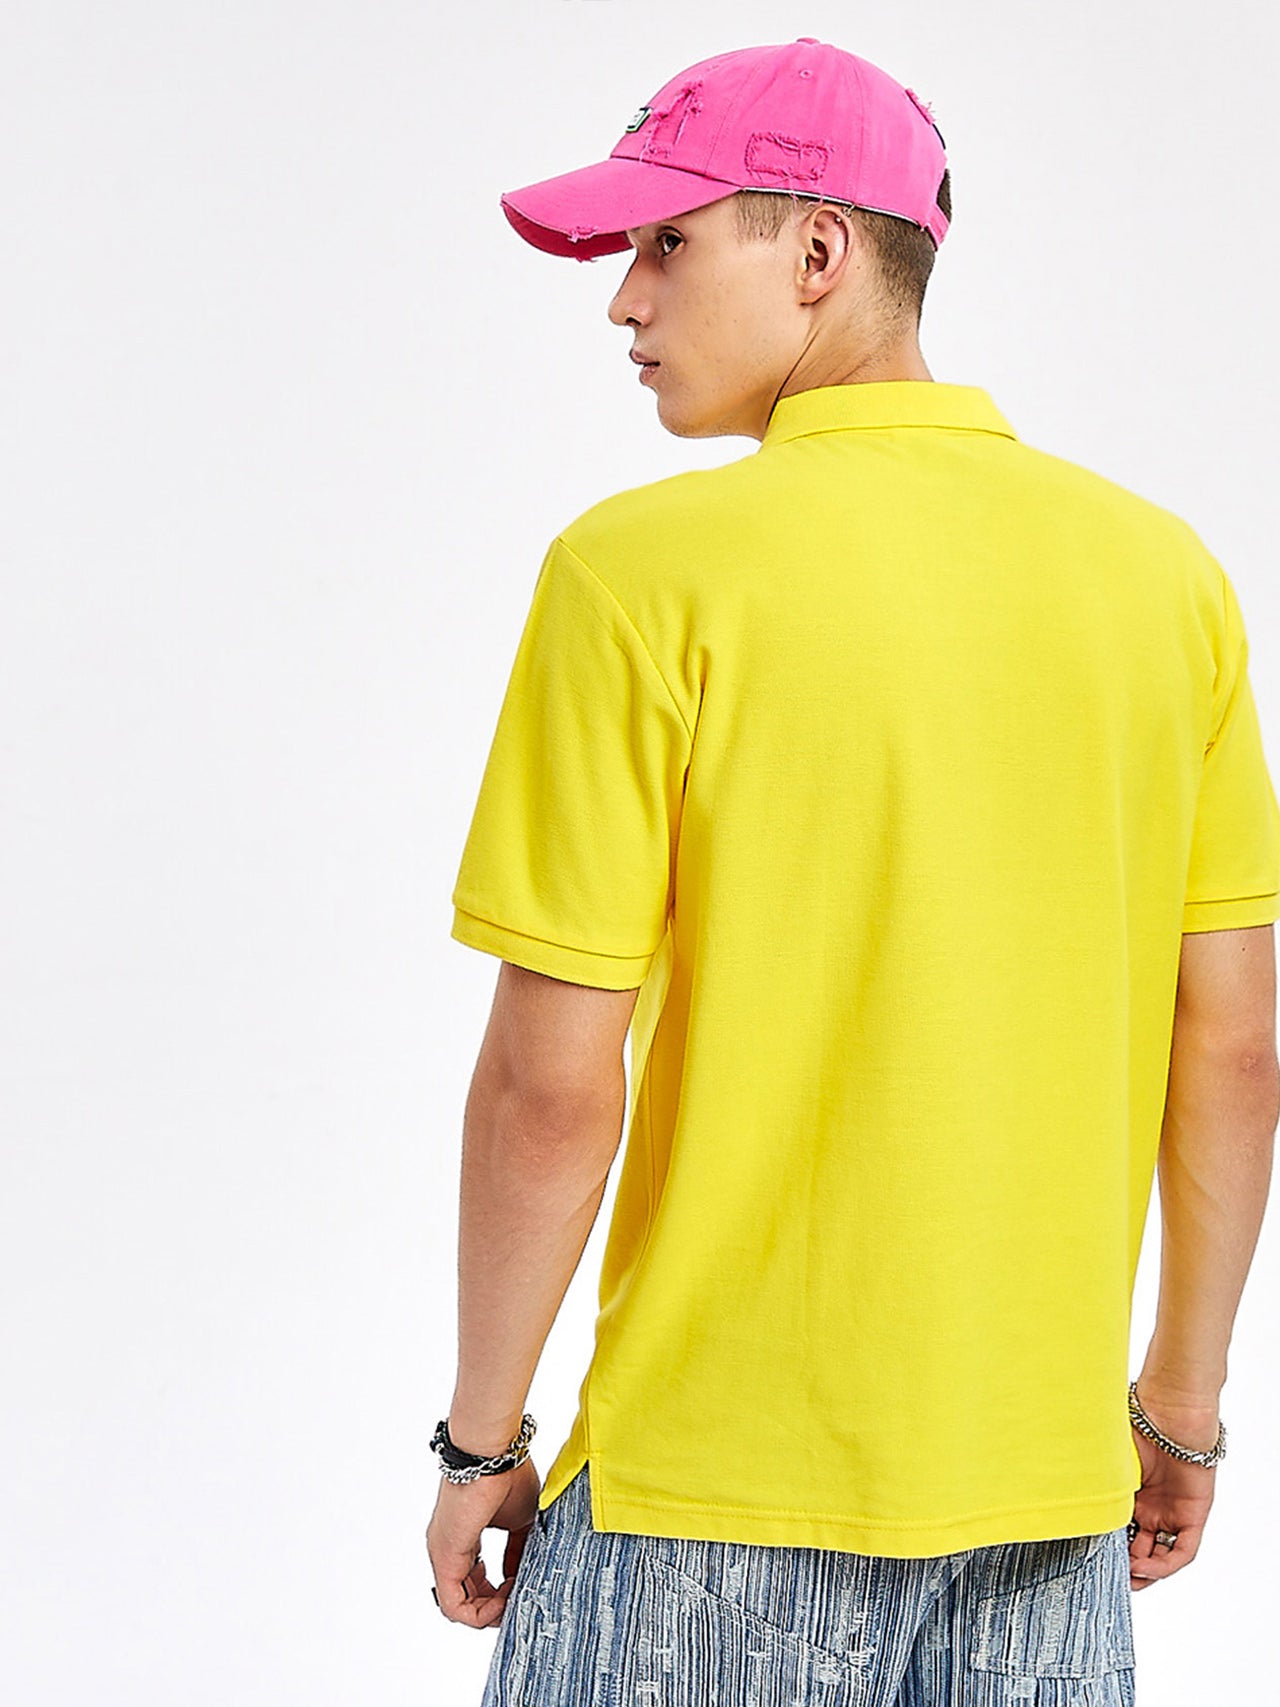 Casual Plain Yellow 100% Cotton Polo T-Shirts for men's 